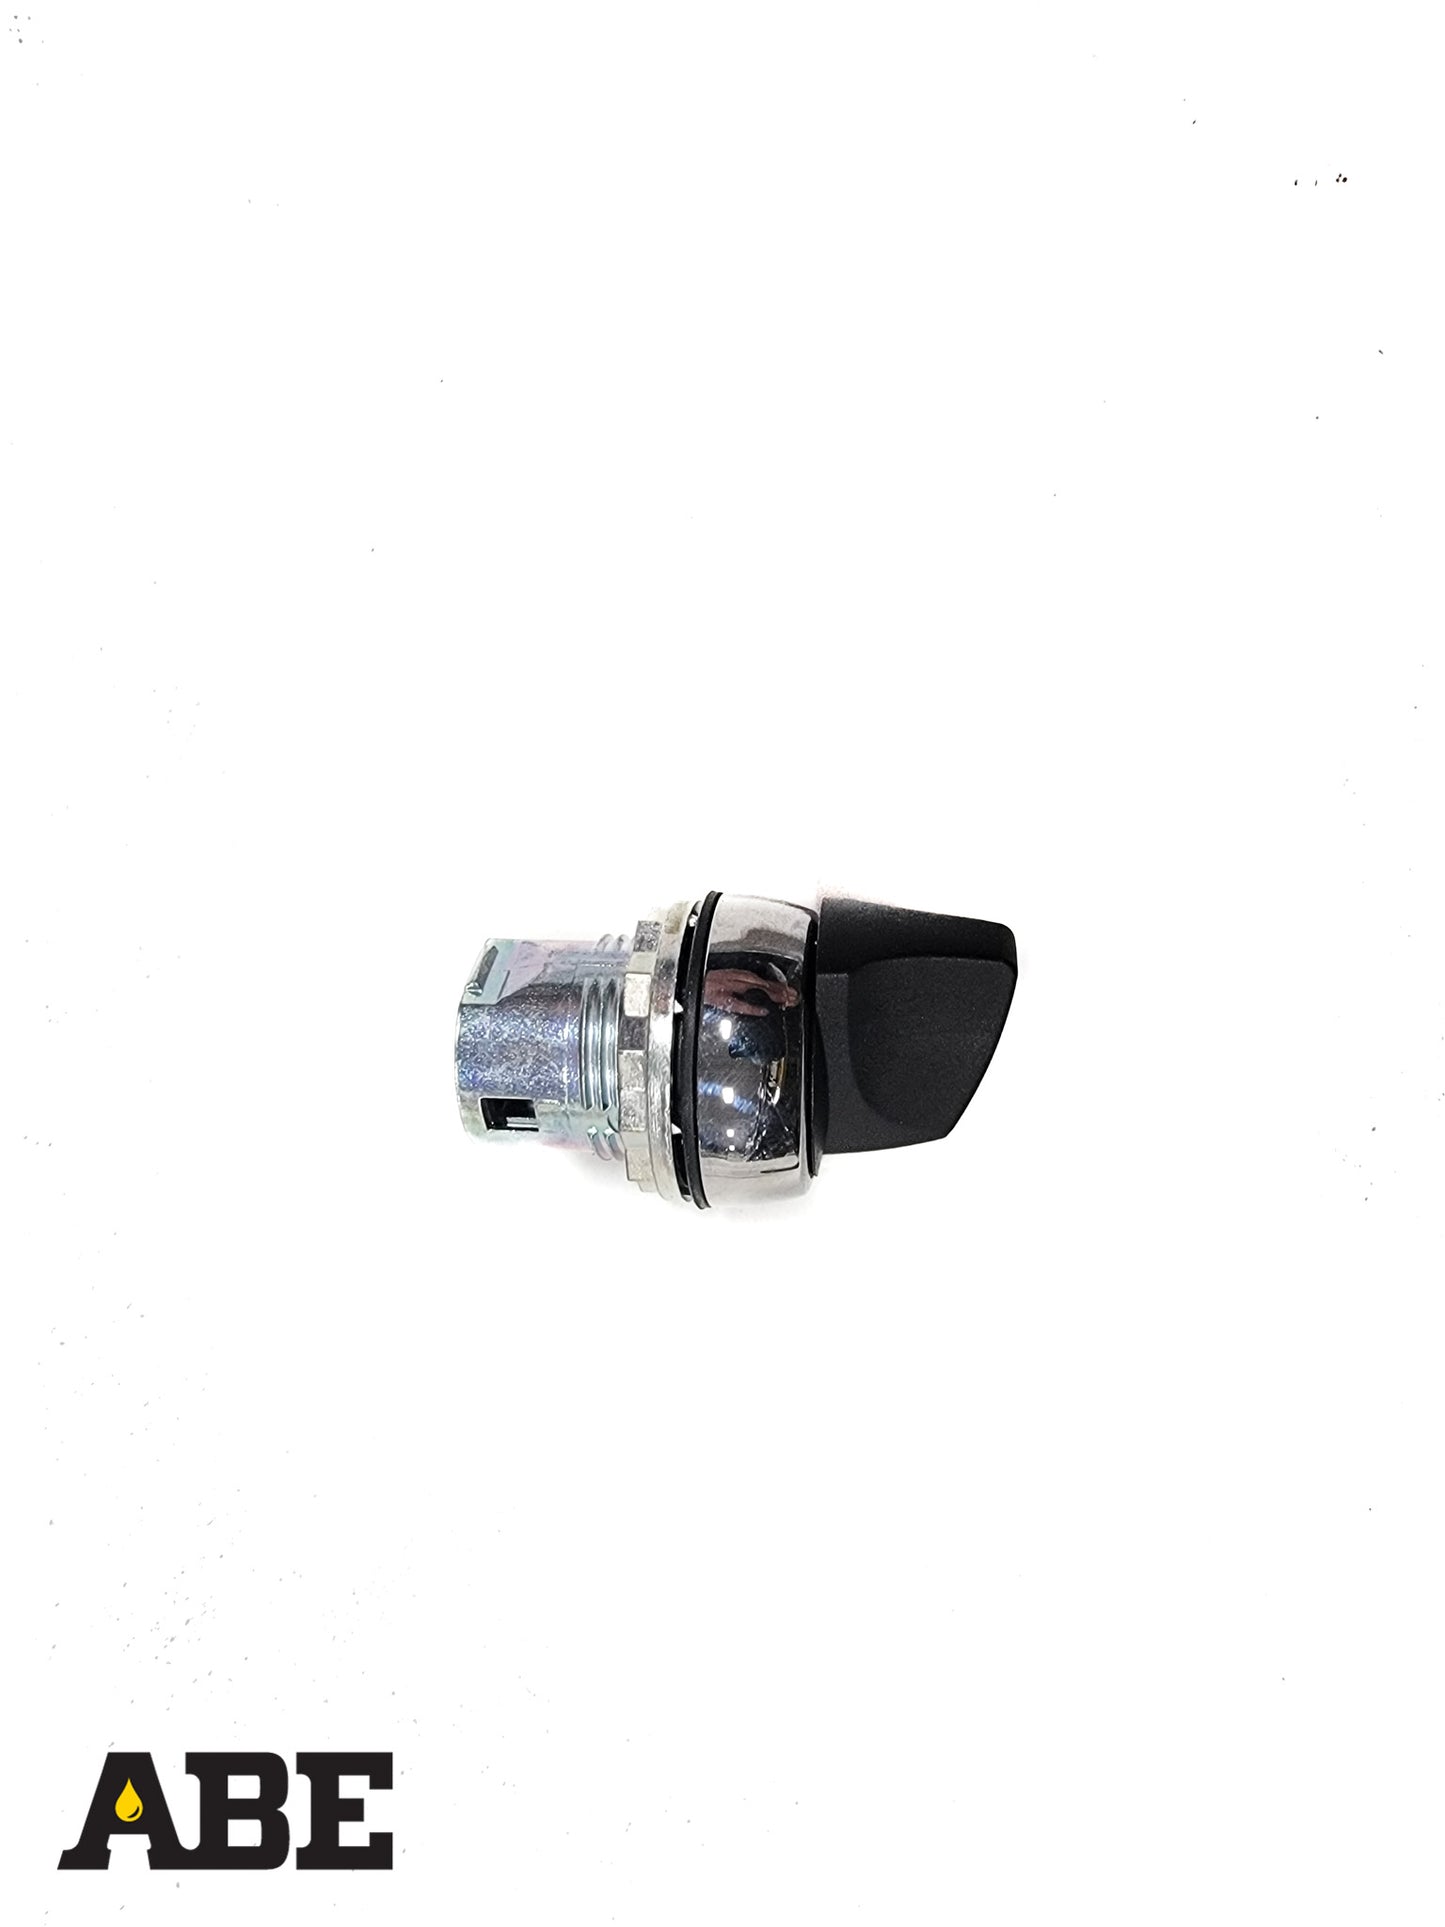 22mm 3 Position Selector Switch